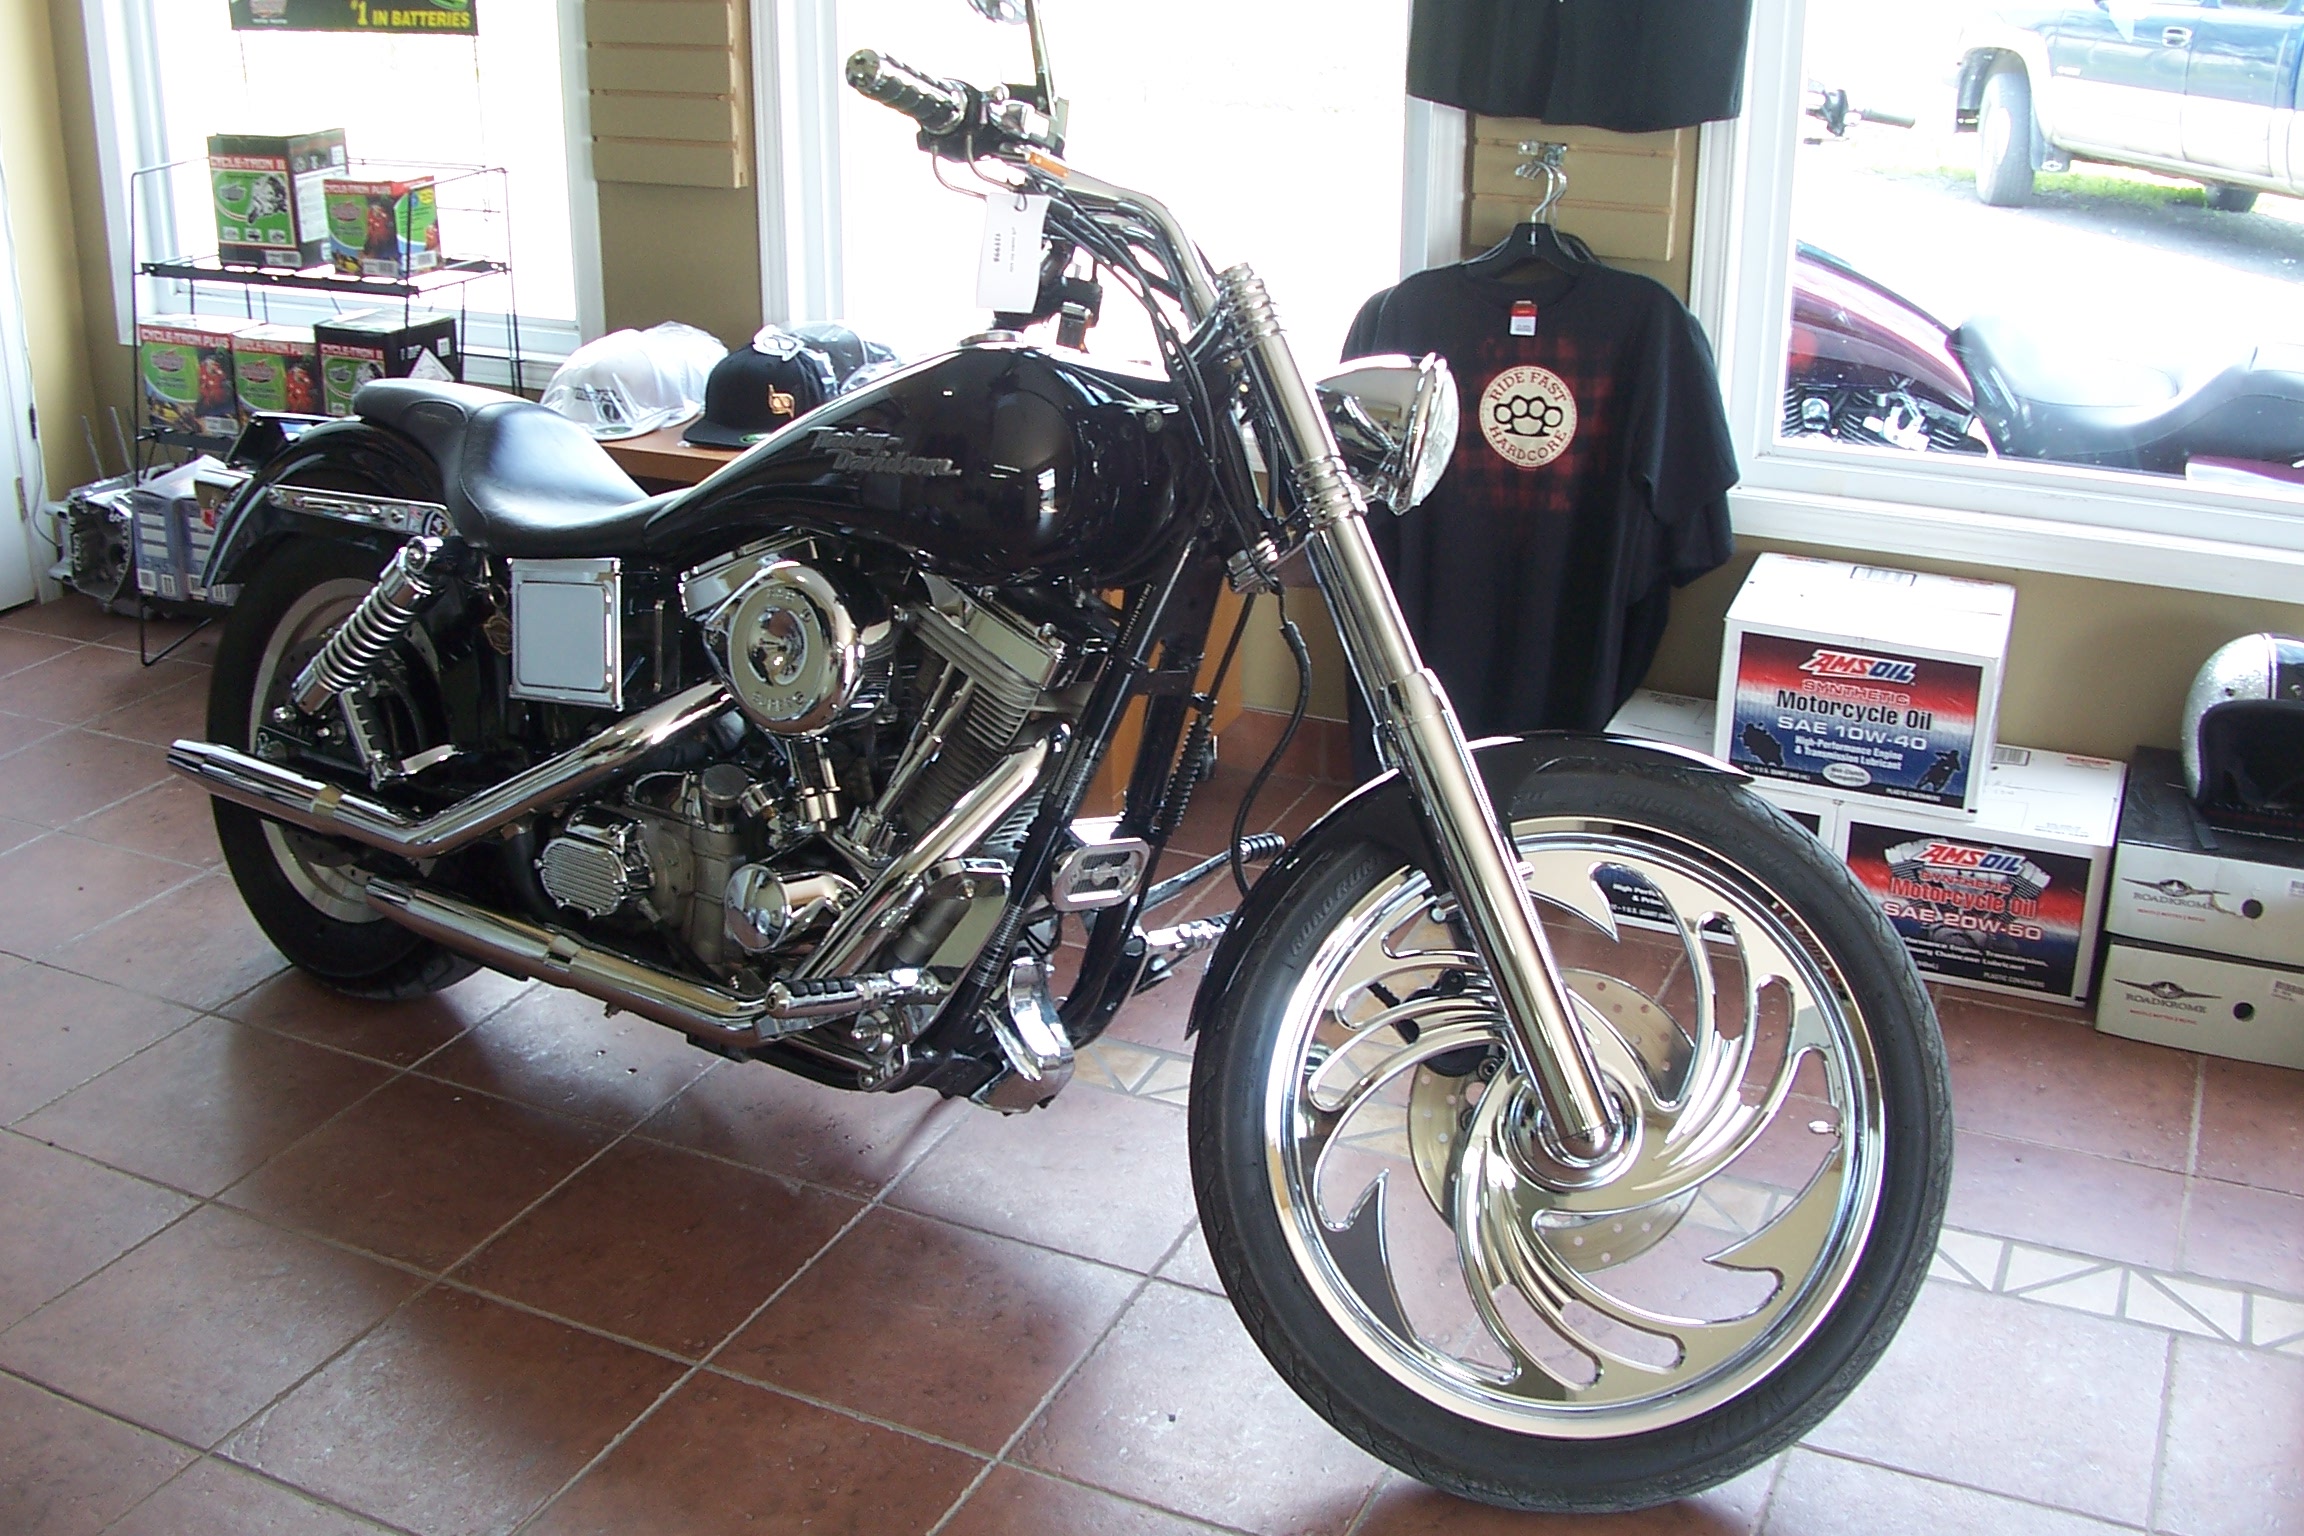 Check out our customers bikes!!